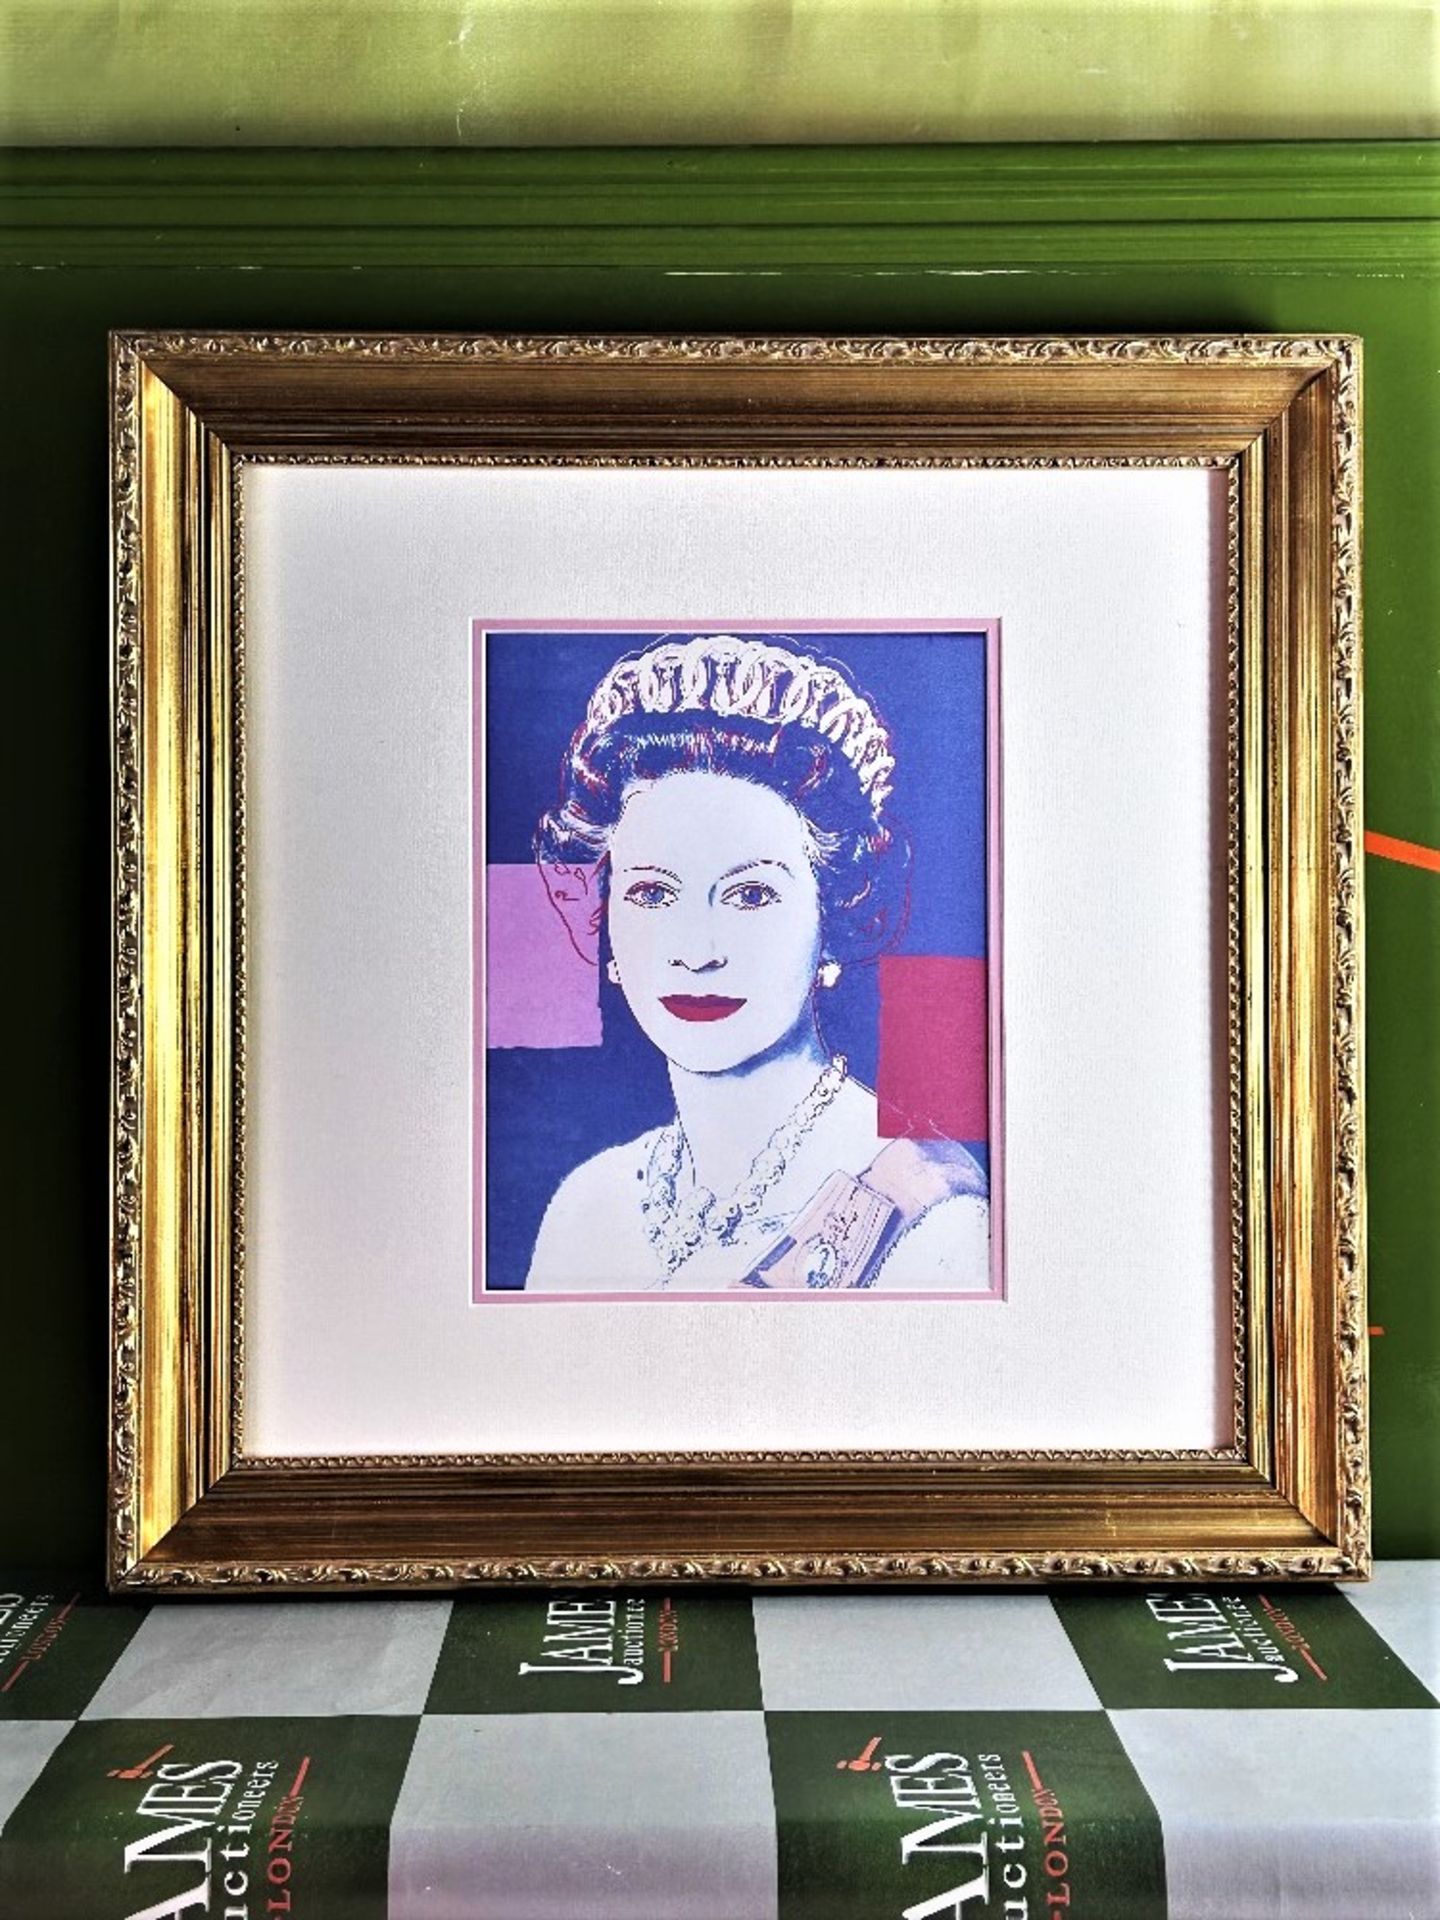 Andy Warhol (1928-1987) "Elizabeth " 1987 Edition Lithograph - Image 6 of 6